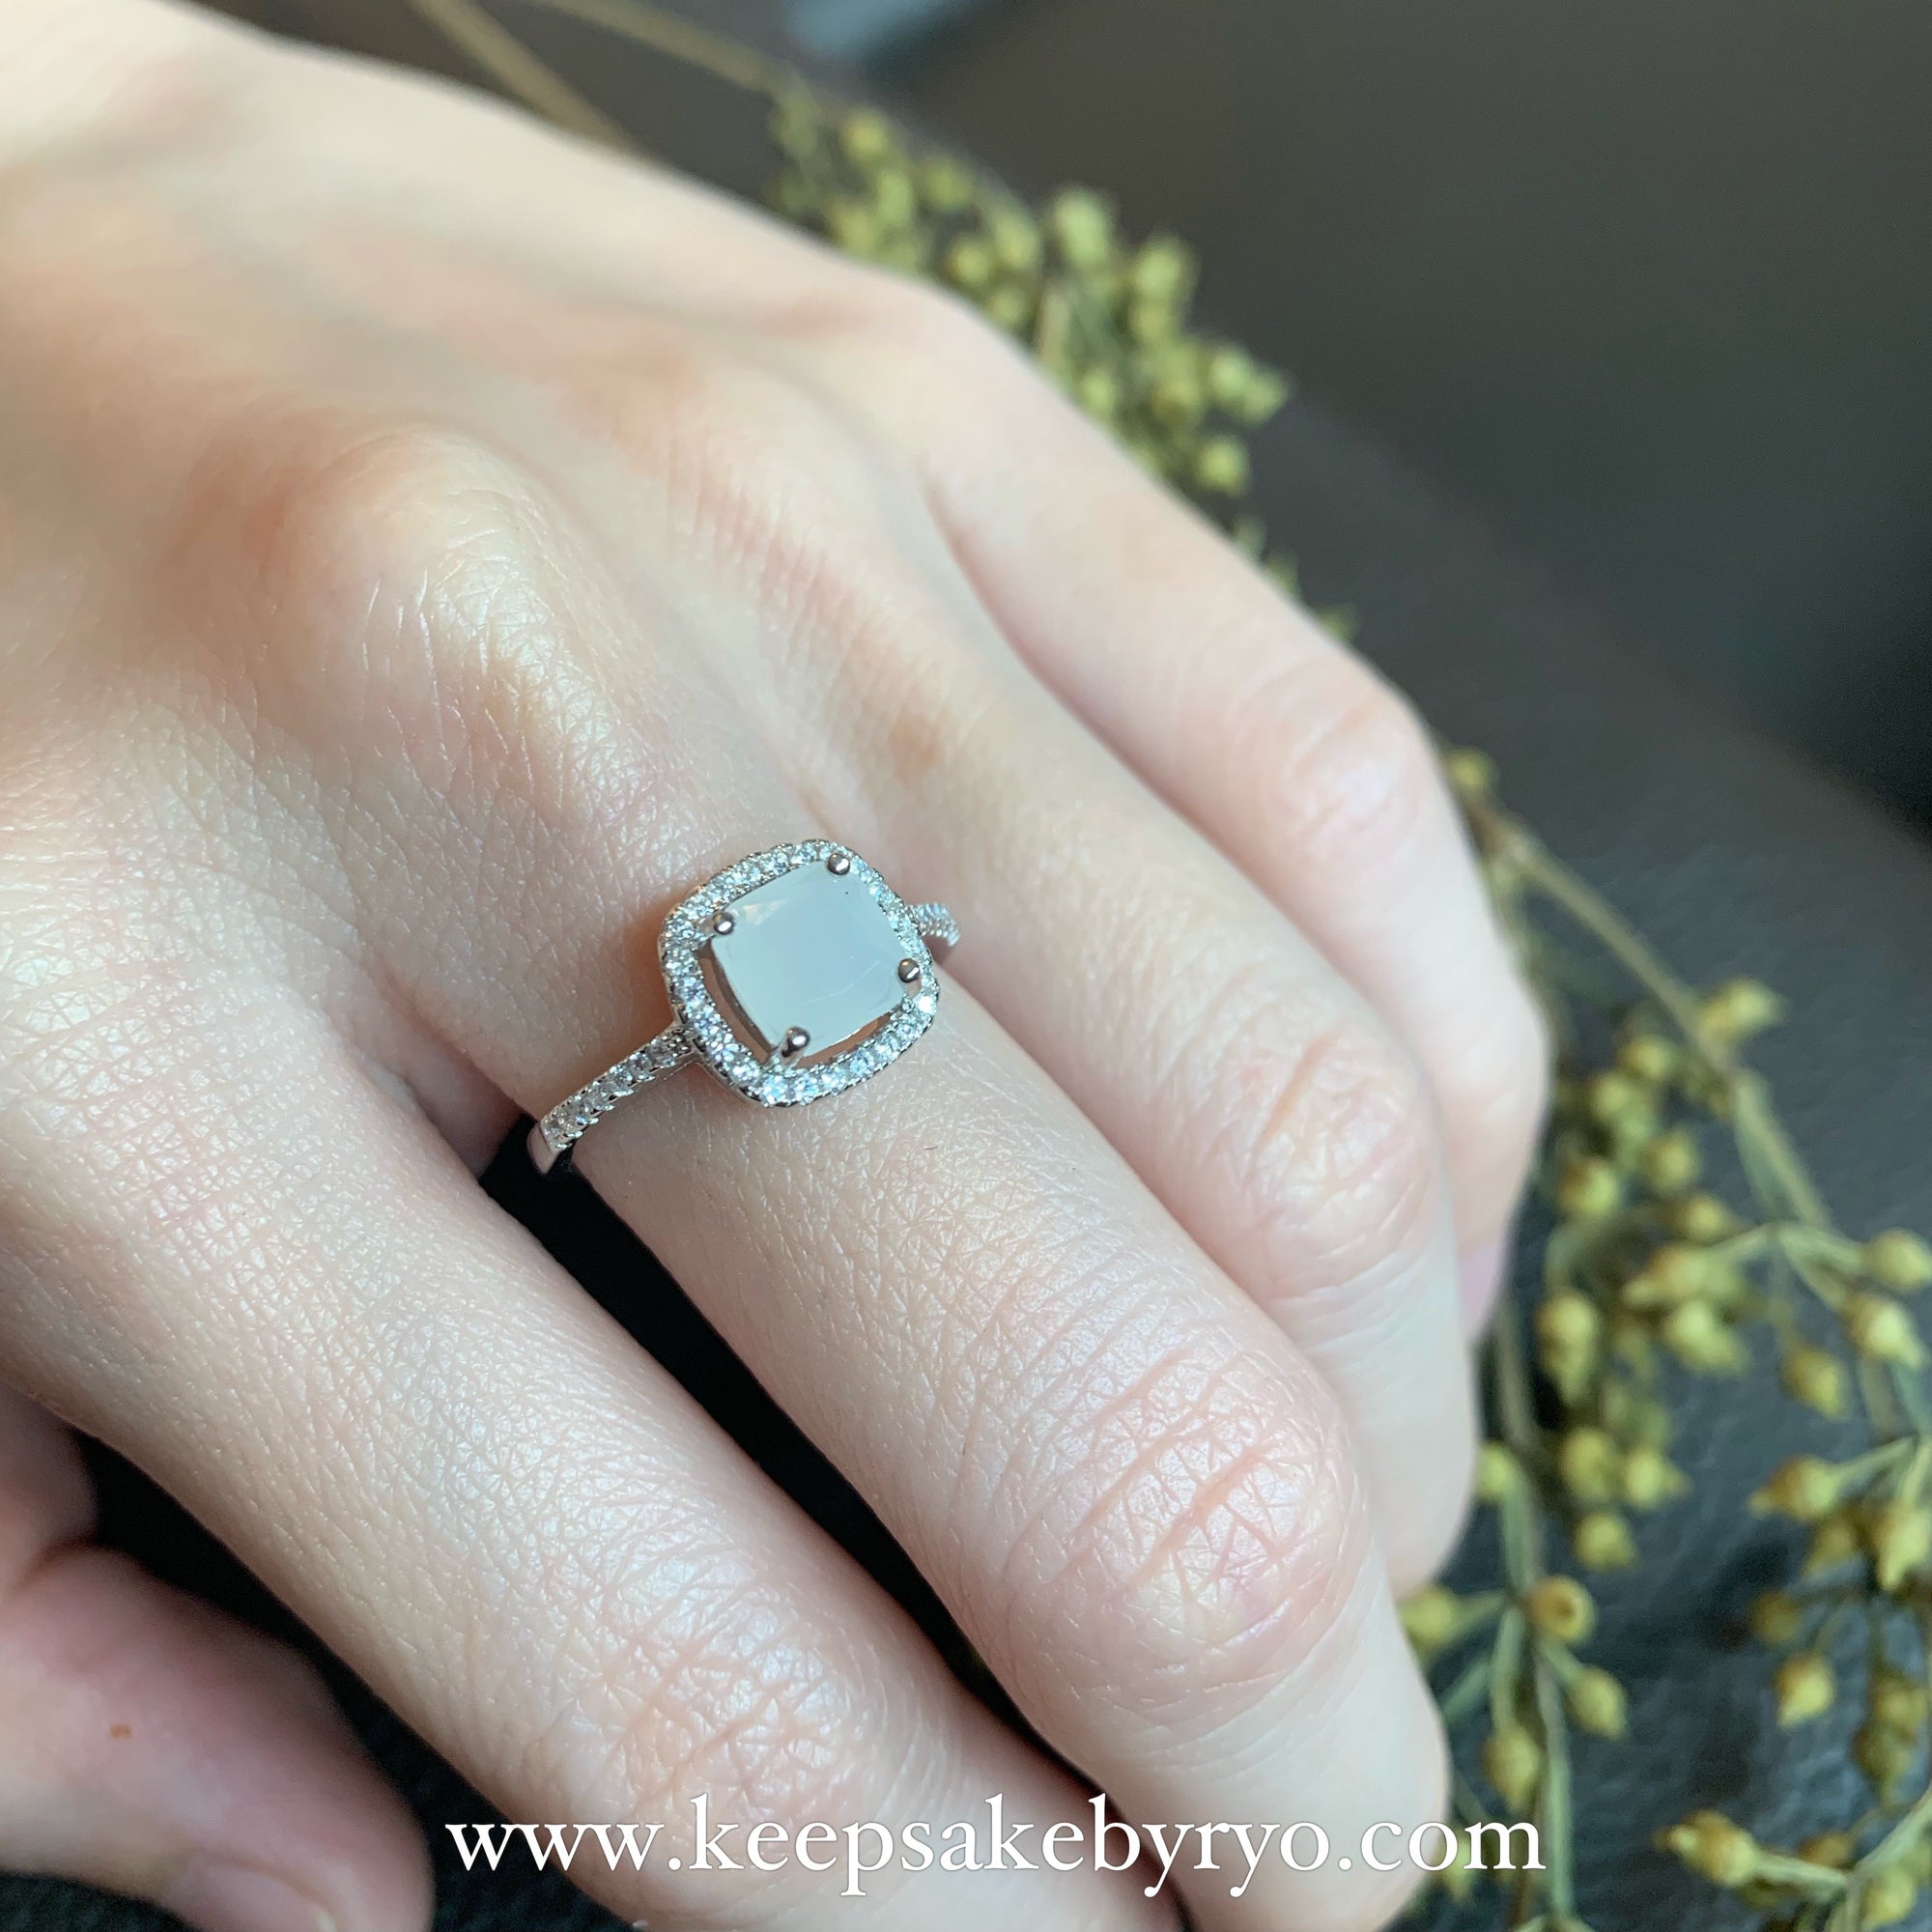 SOLITAIRE: YARA RING WITH CUSHION INCLUSION STONE